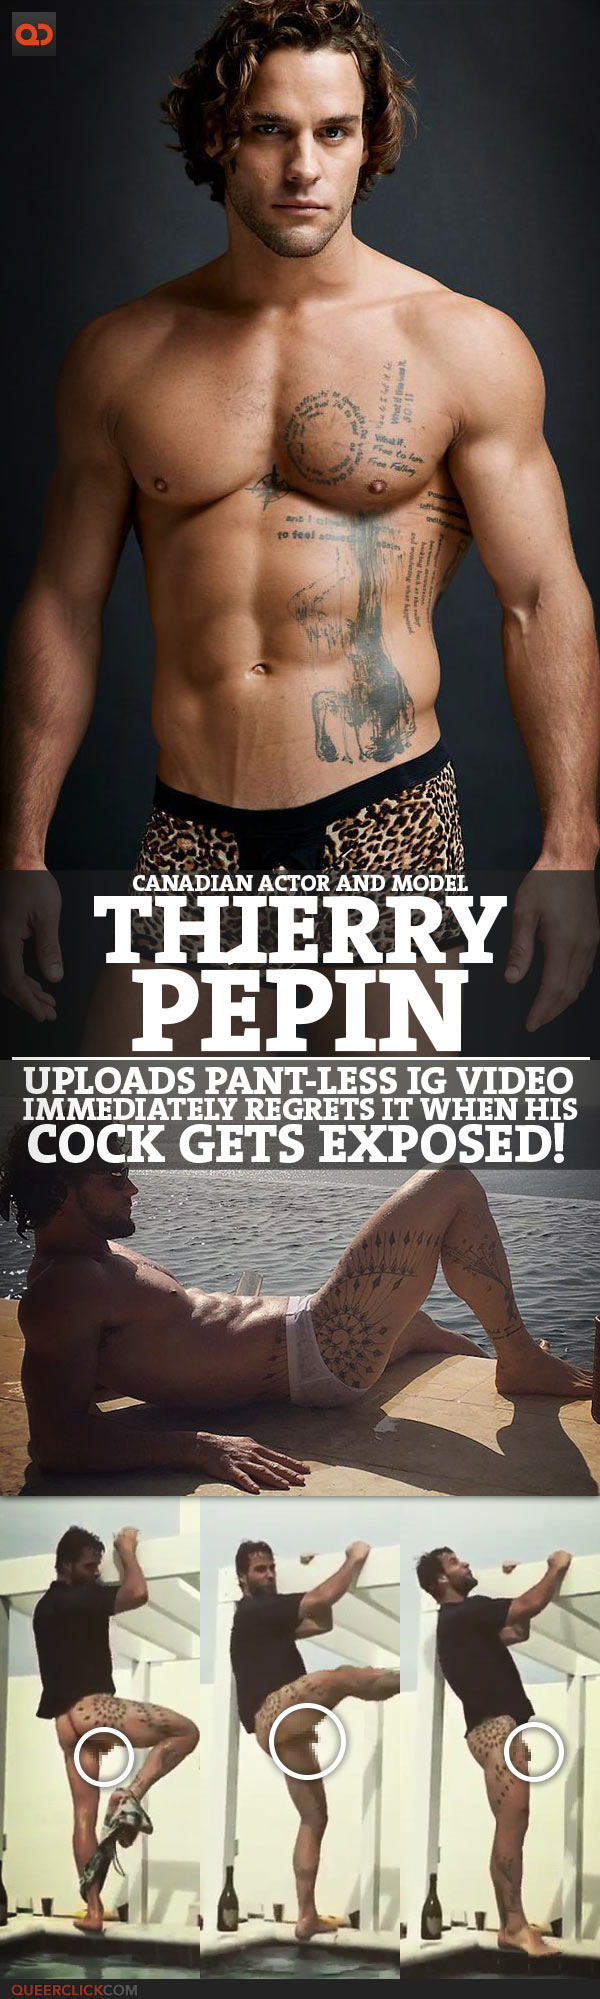 Thierry Pépin, Canadian Actor And Model, Uploads Pant-Less IG Video - Immediately Regrets It When His Cock Gets Exposed!